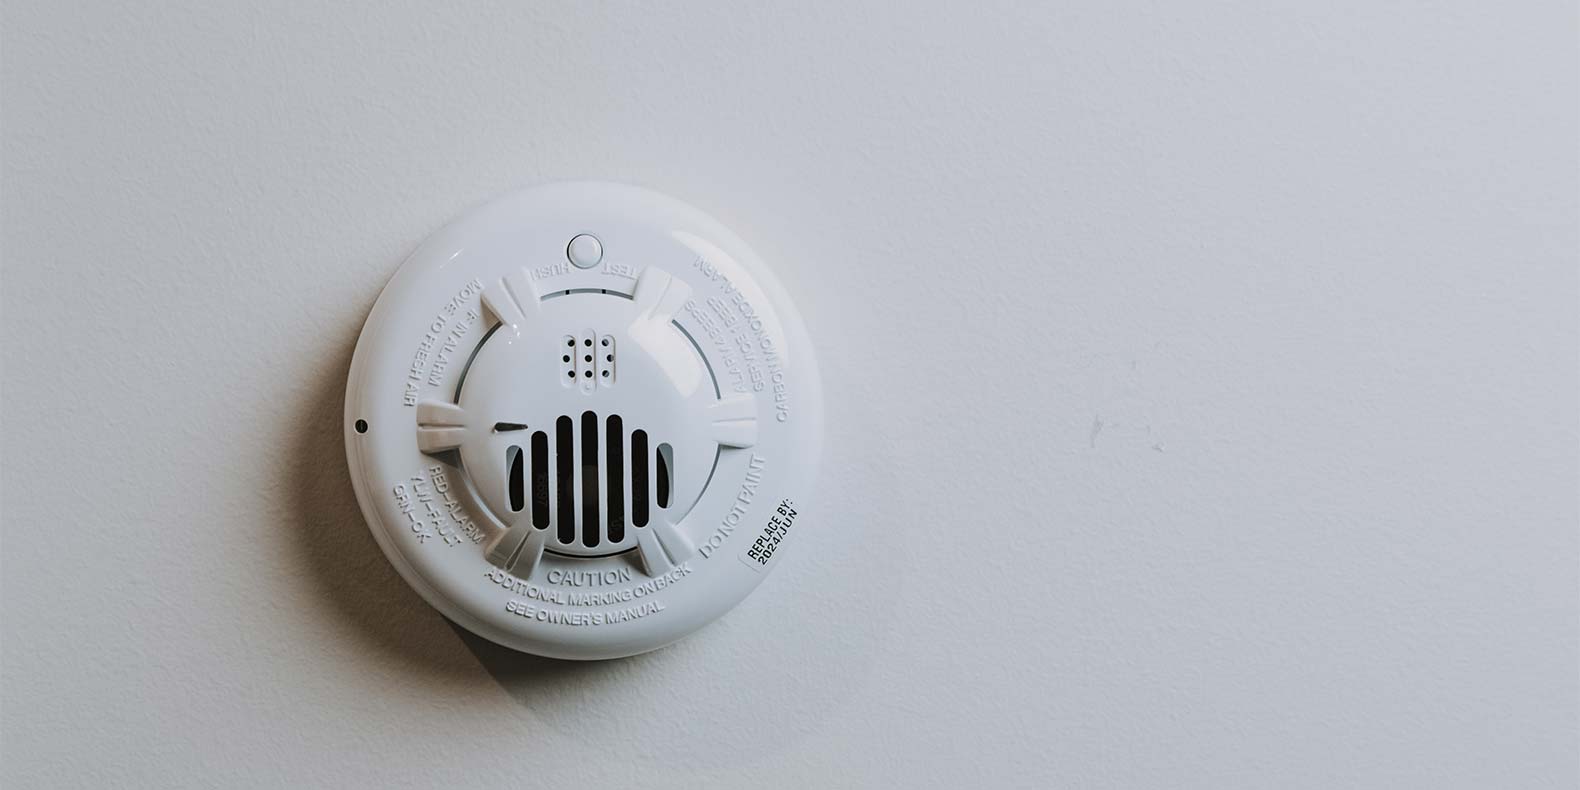 Where to Place Carbon Monoxide Detectors in Your Home